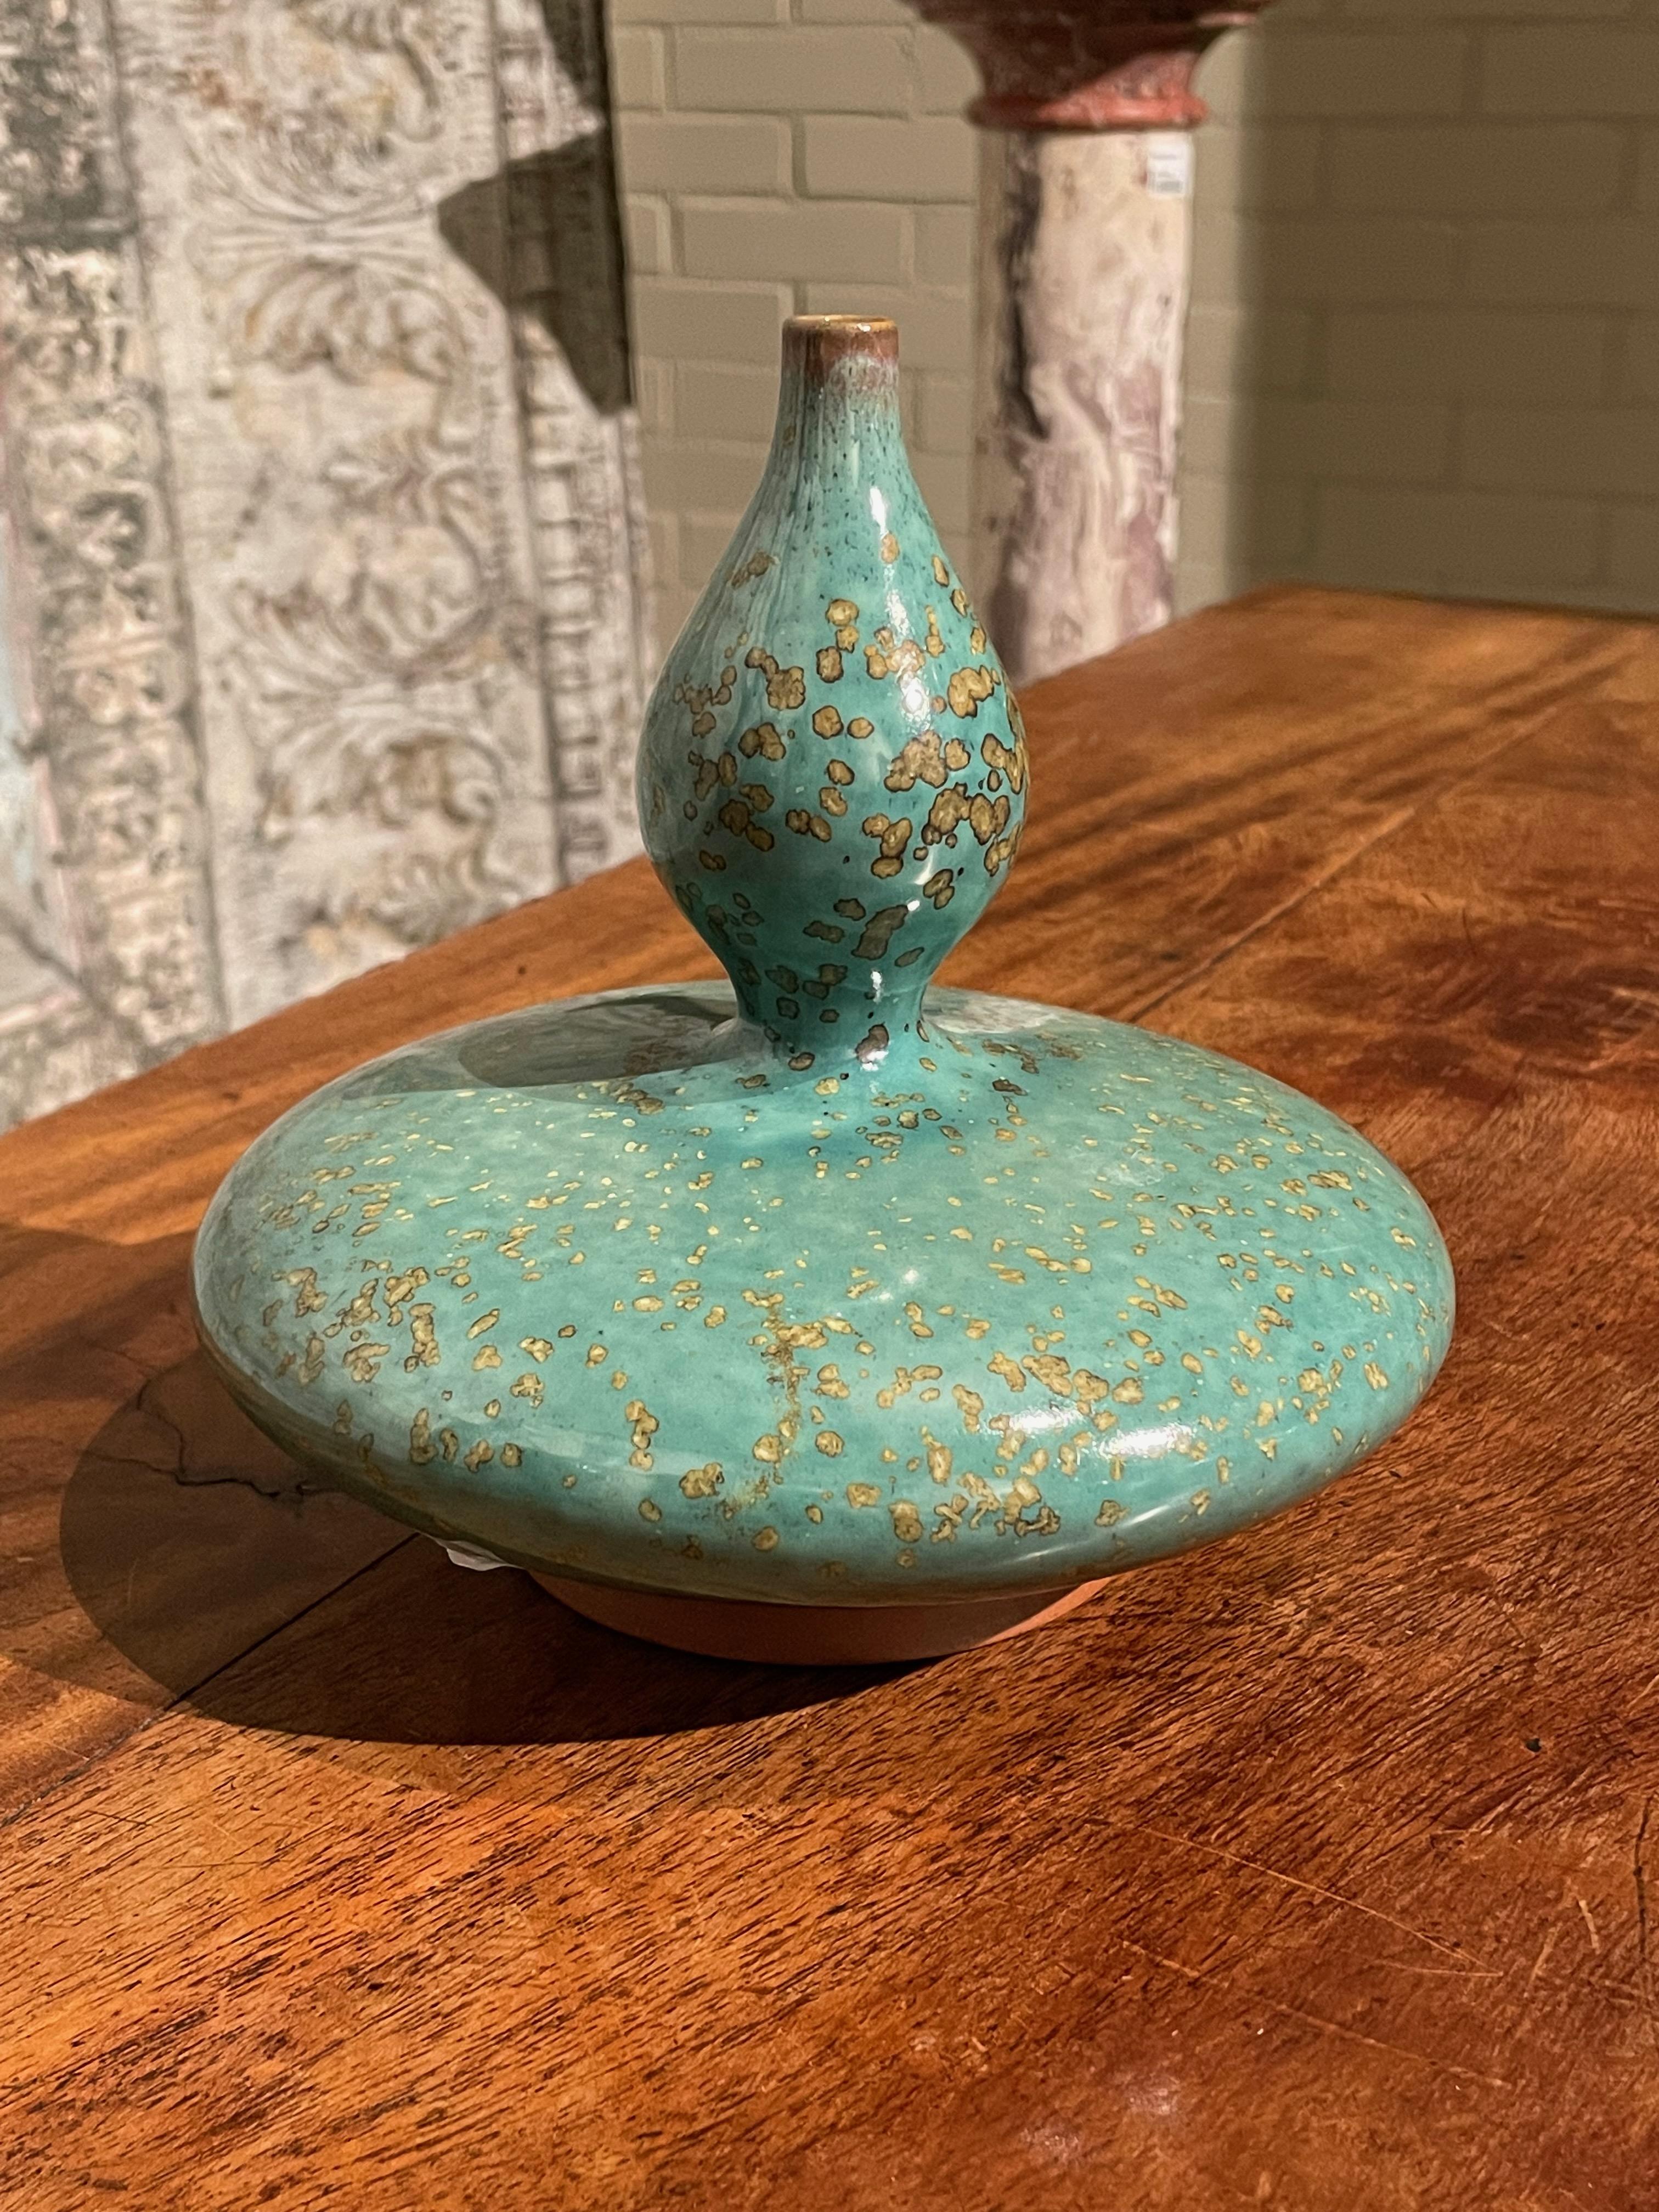 Ceramic Turquoise with Gold Speckled Glaze Squat Shape Vase, China, Contemporary